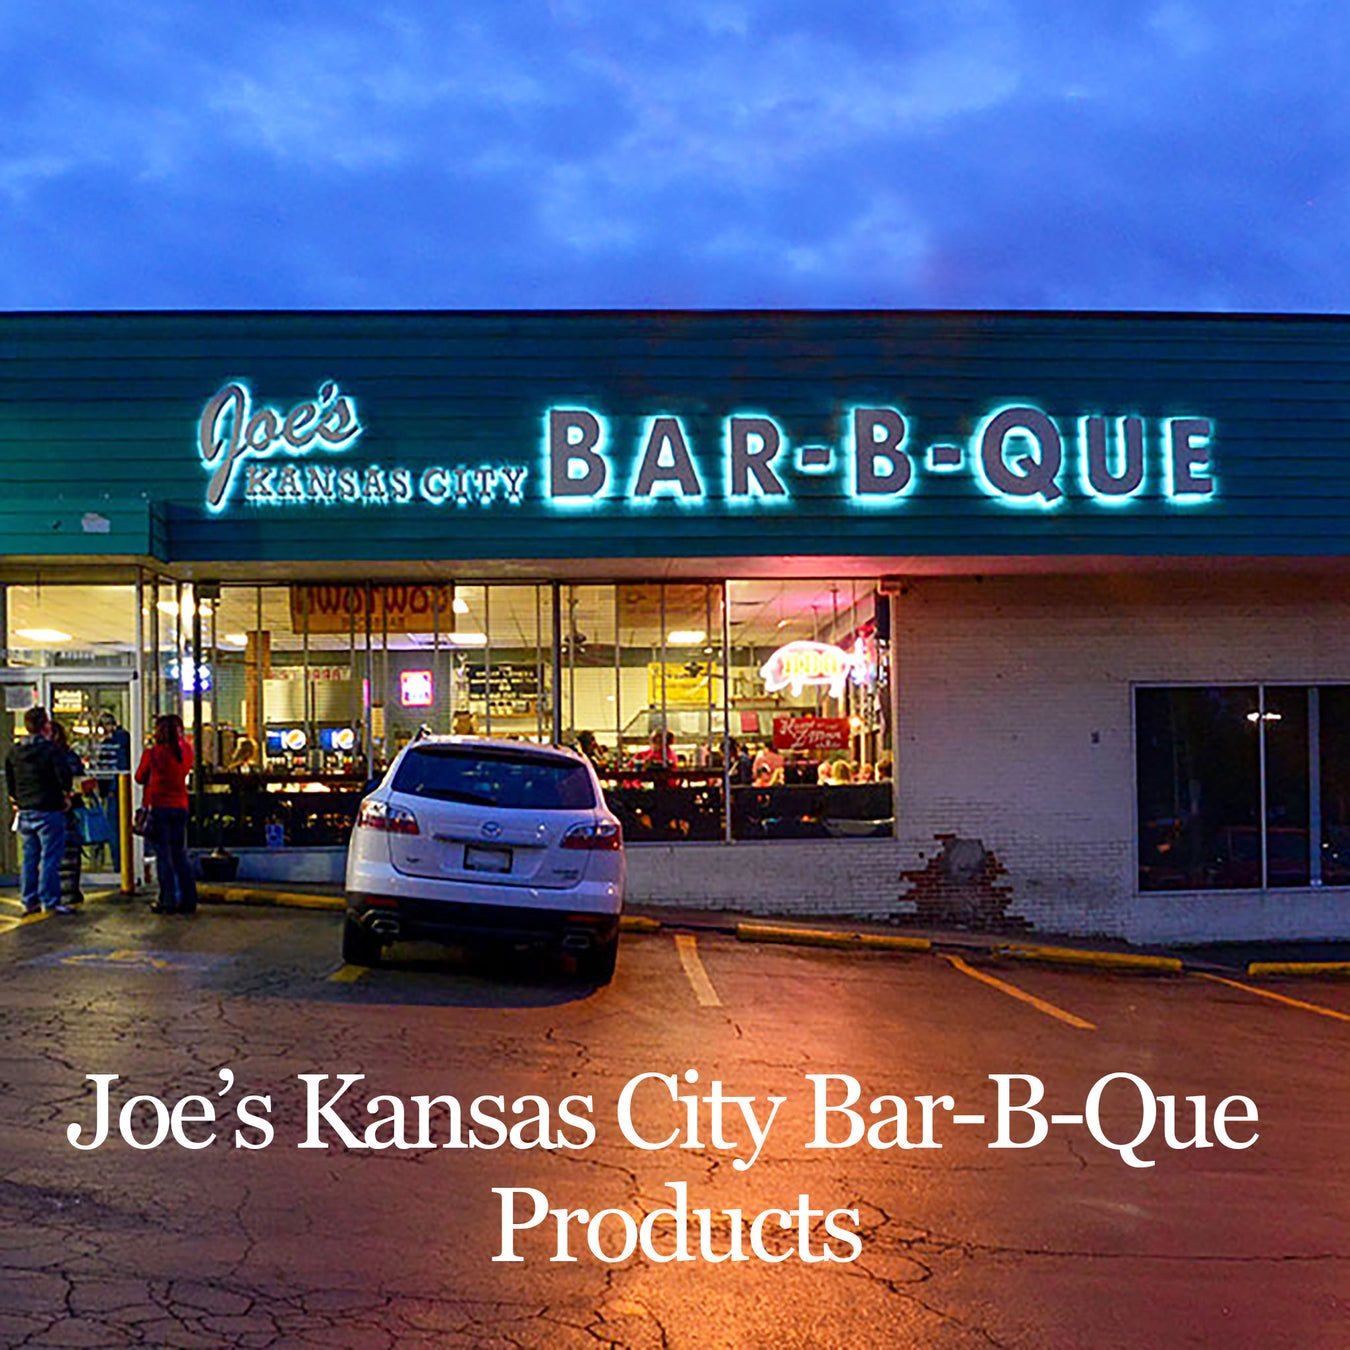 Everyone knows Joe's BBQ - especially us! We carry a full line of Joe's KC BBQ Sauces, Rubs, Apparel, gift boxes and more! 